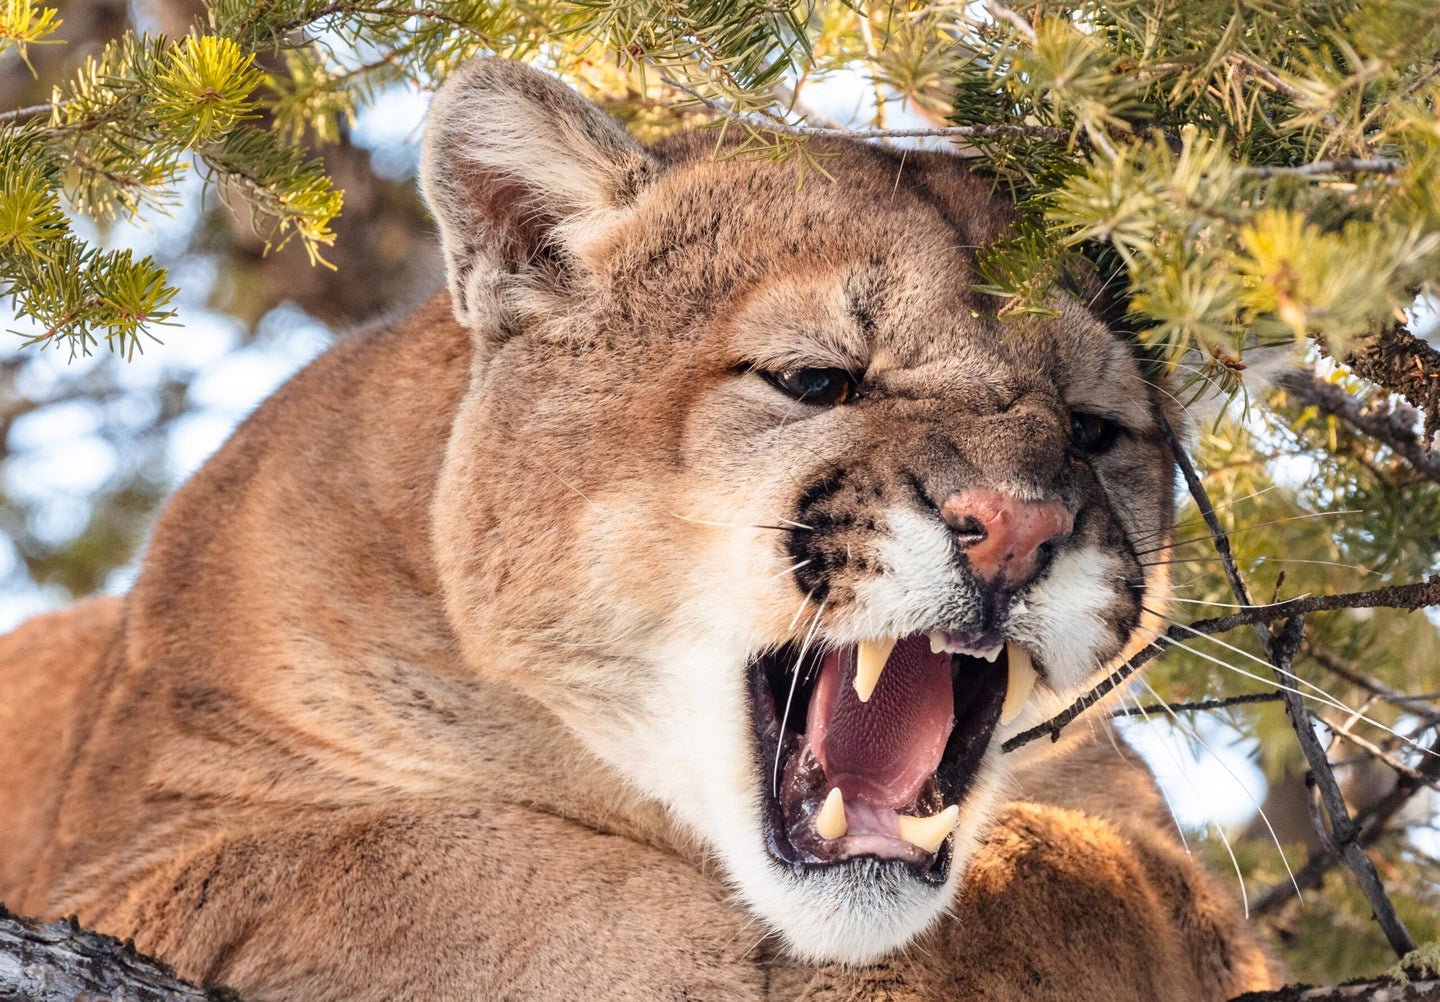 Canadian Plumber Kicks a Cougar in the Head to Save His Daughter’s Dog